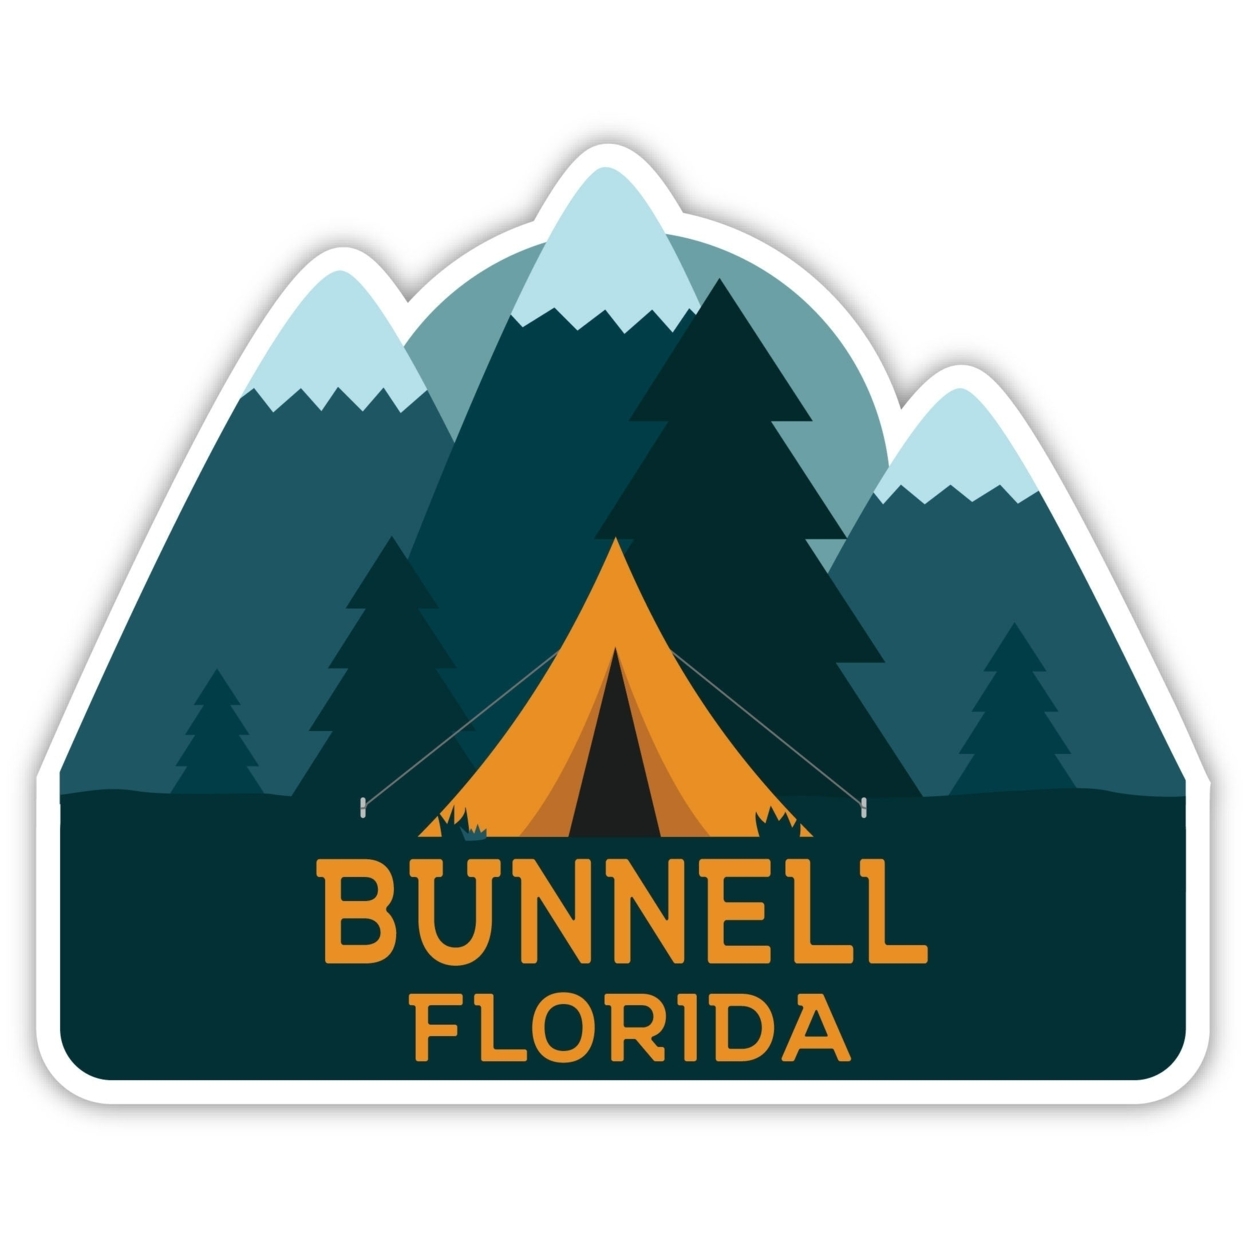 Bunnell Florida Souvenir Decorative Stickers (Choose Theme And Size) - 4-Pack, 8-Inch, Tent